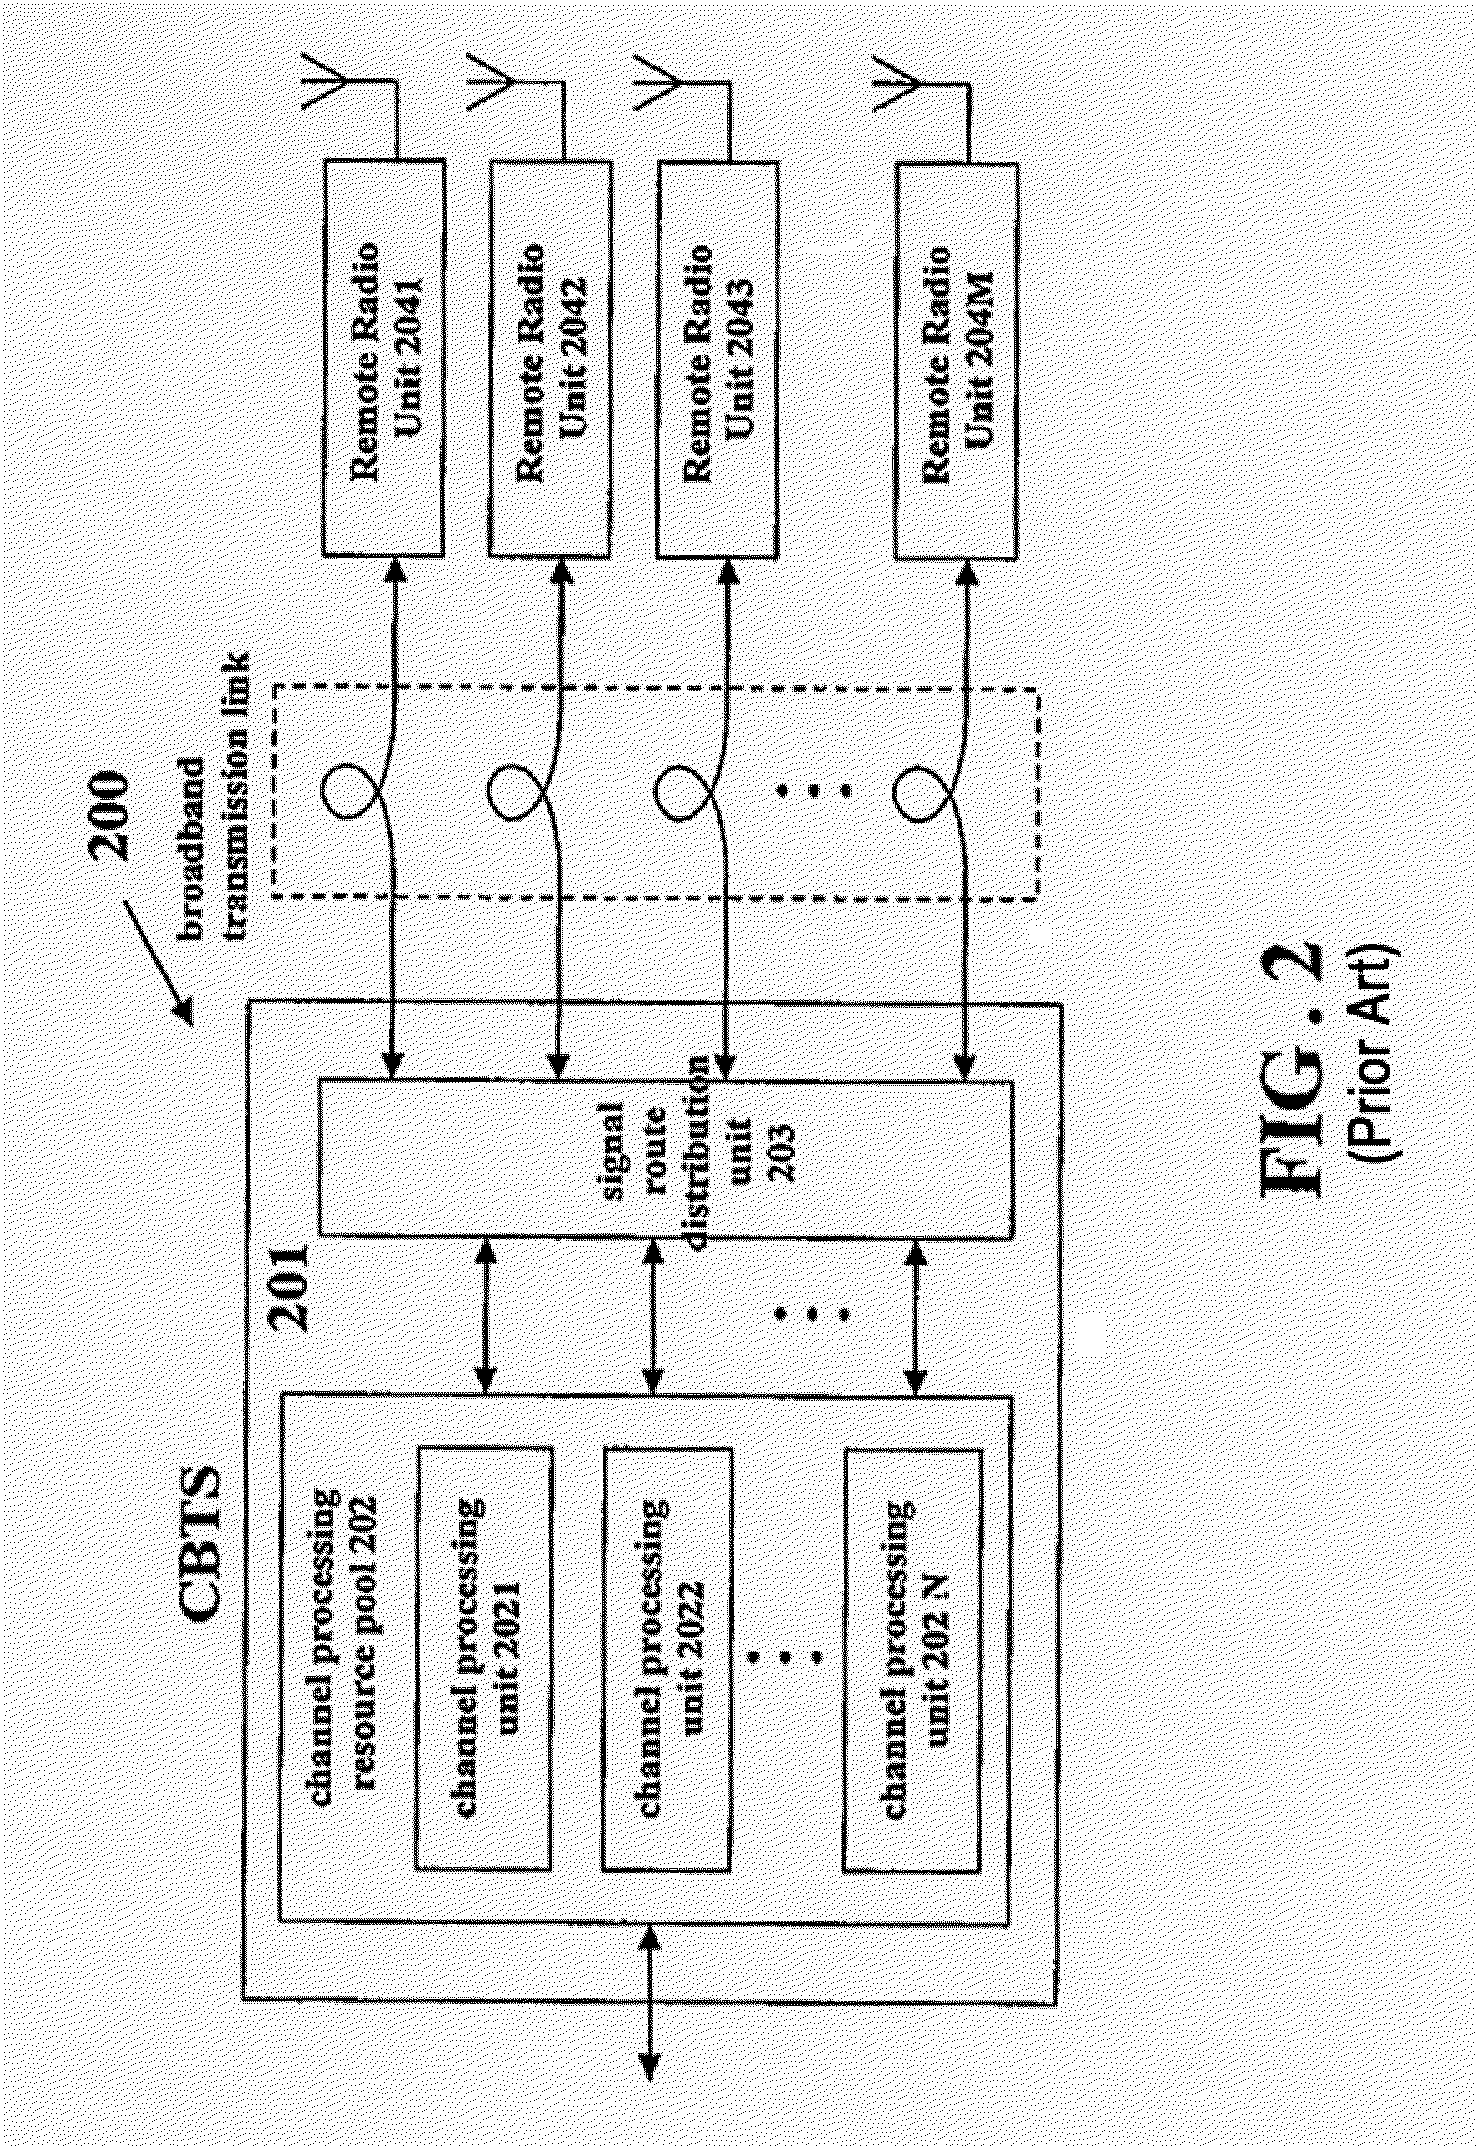 Interface method between remote radio unit and centralized base transceiver station